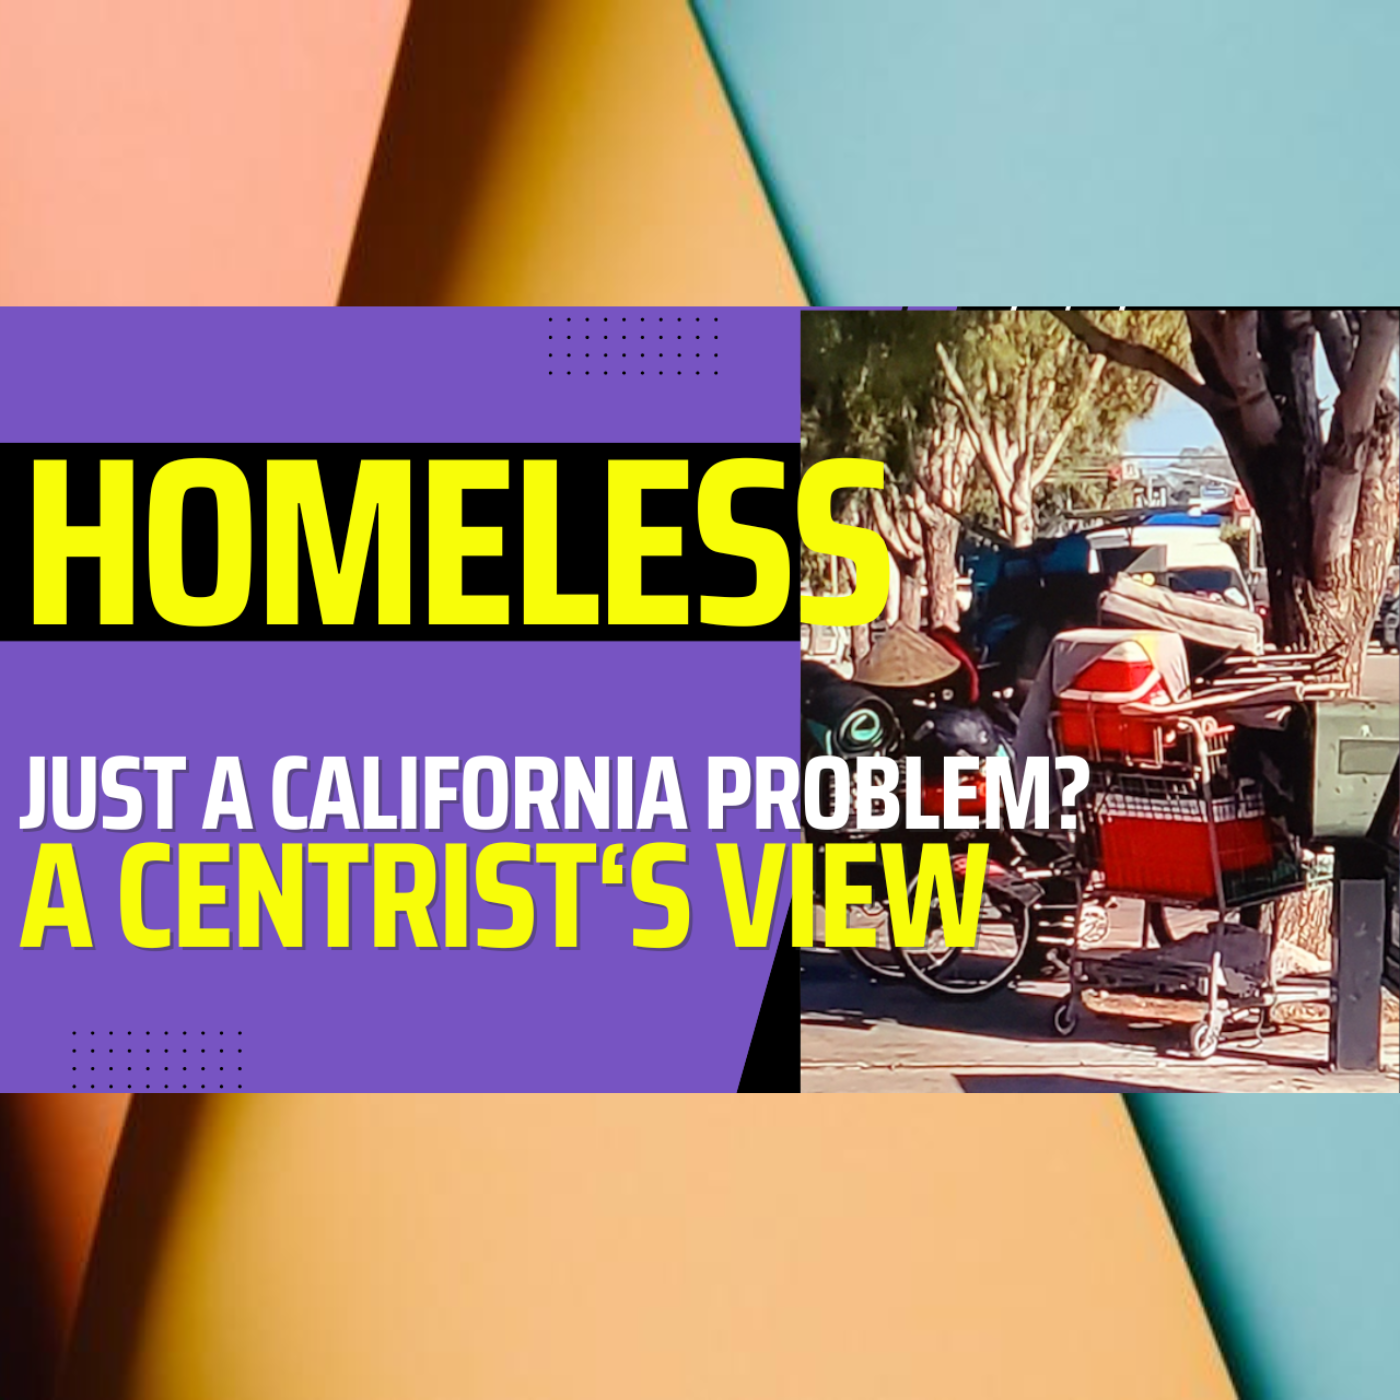 Centrist's view of homeless issues in California